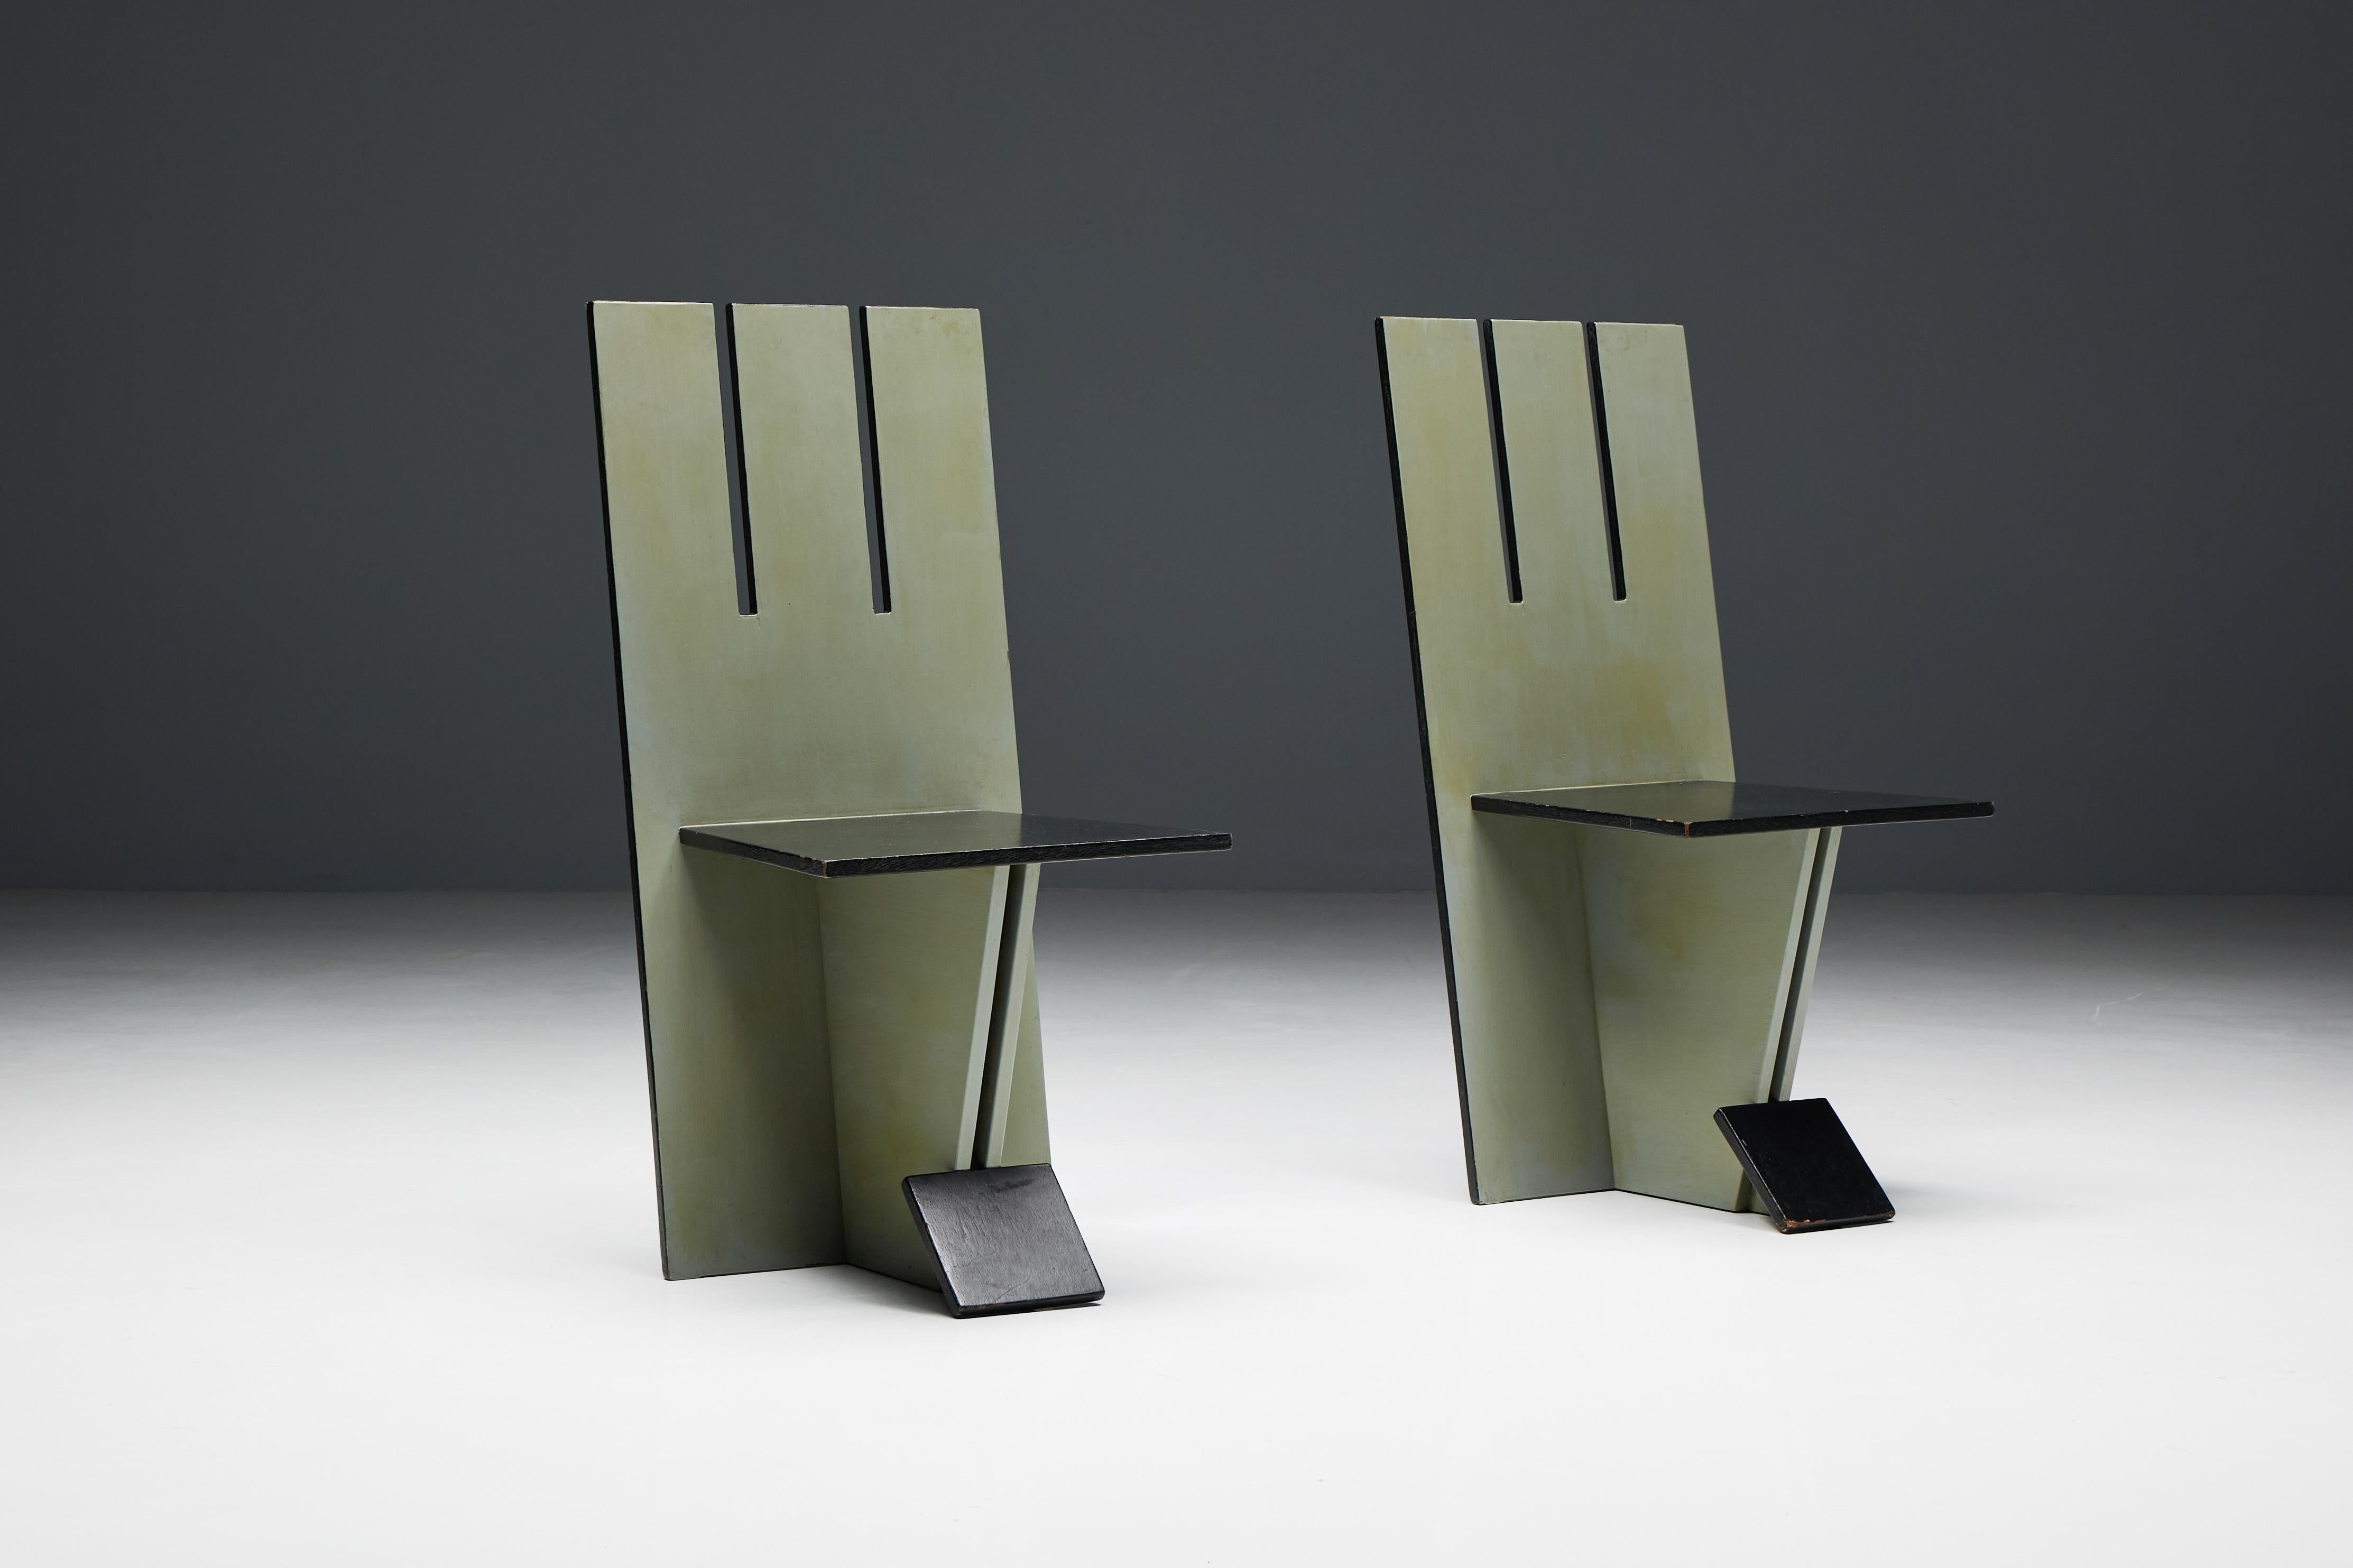 Dining Chairs in the style of De Stijl Movement, Netherlands, 1950s For Sale 3